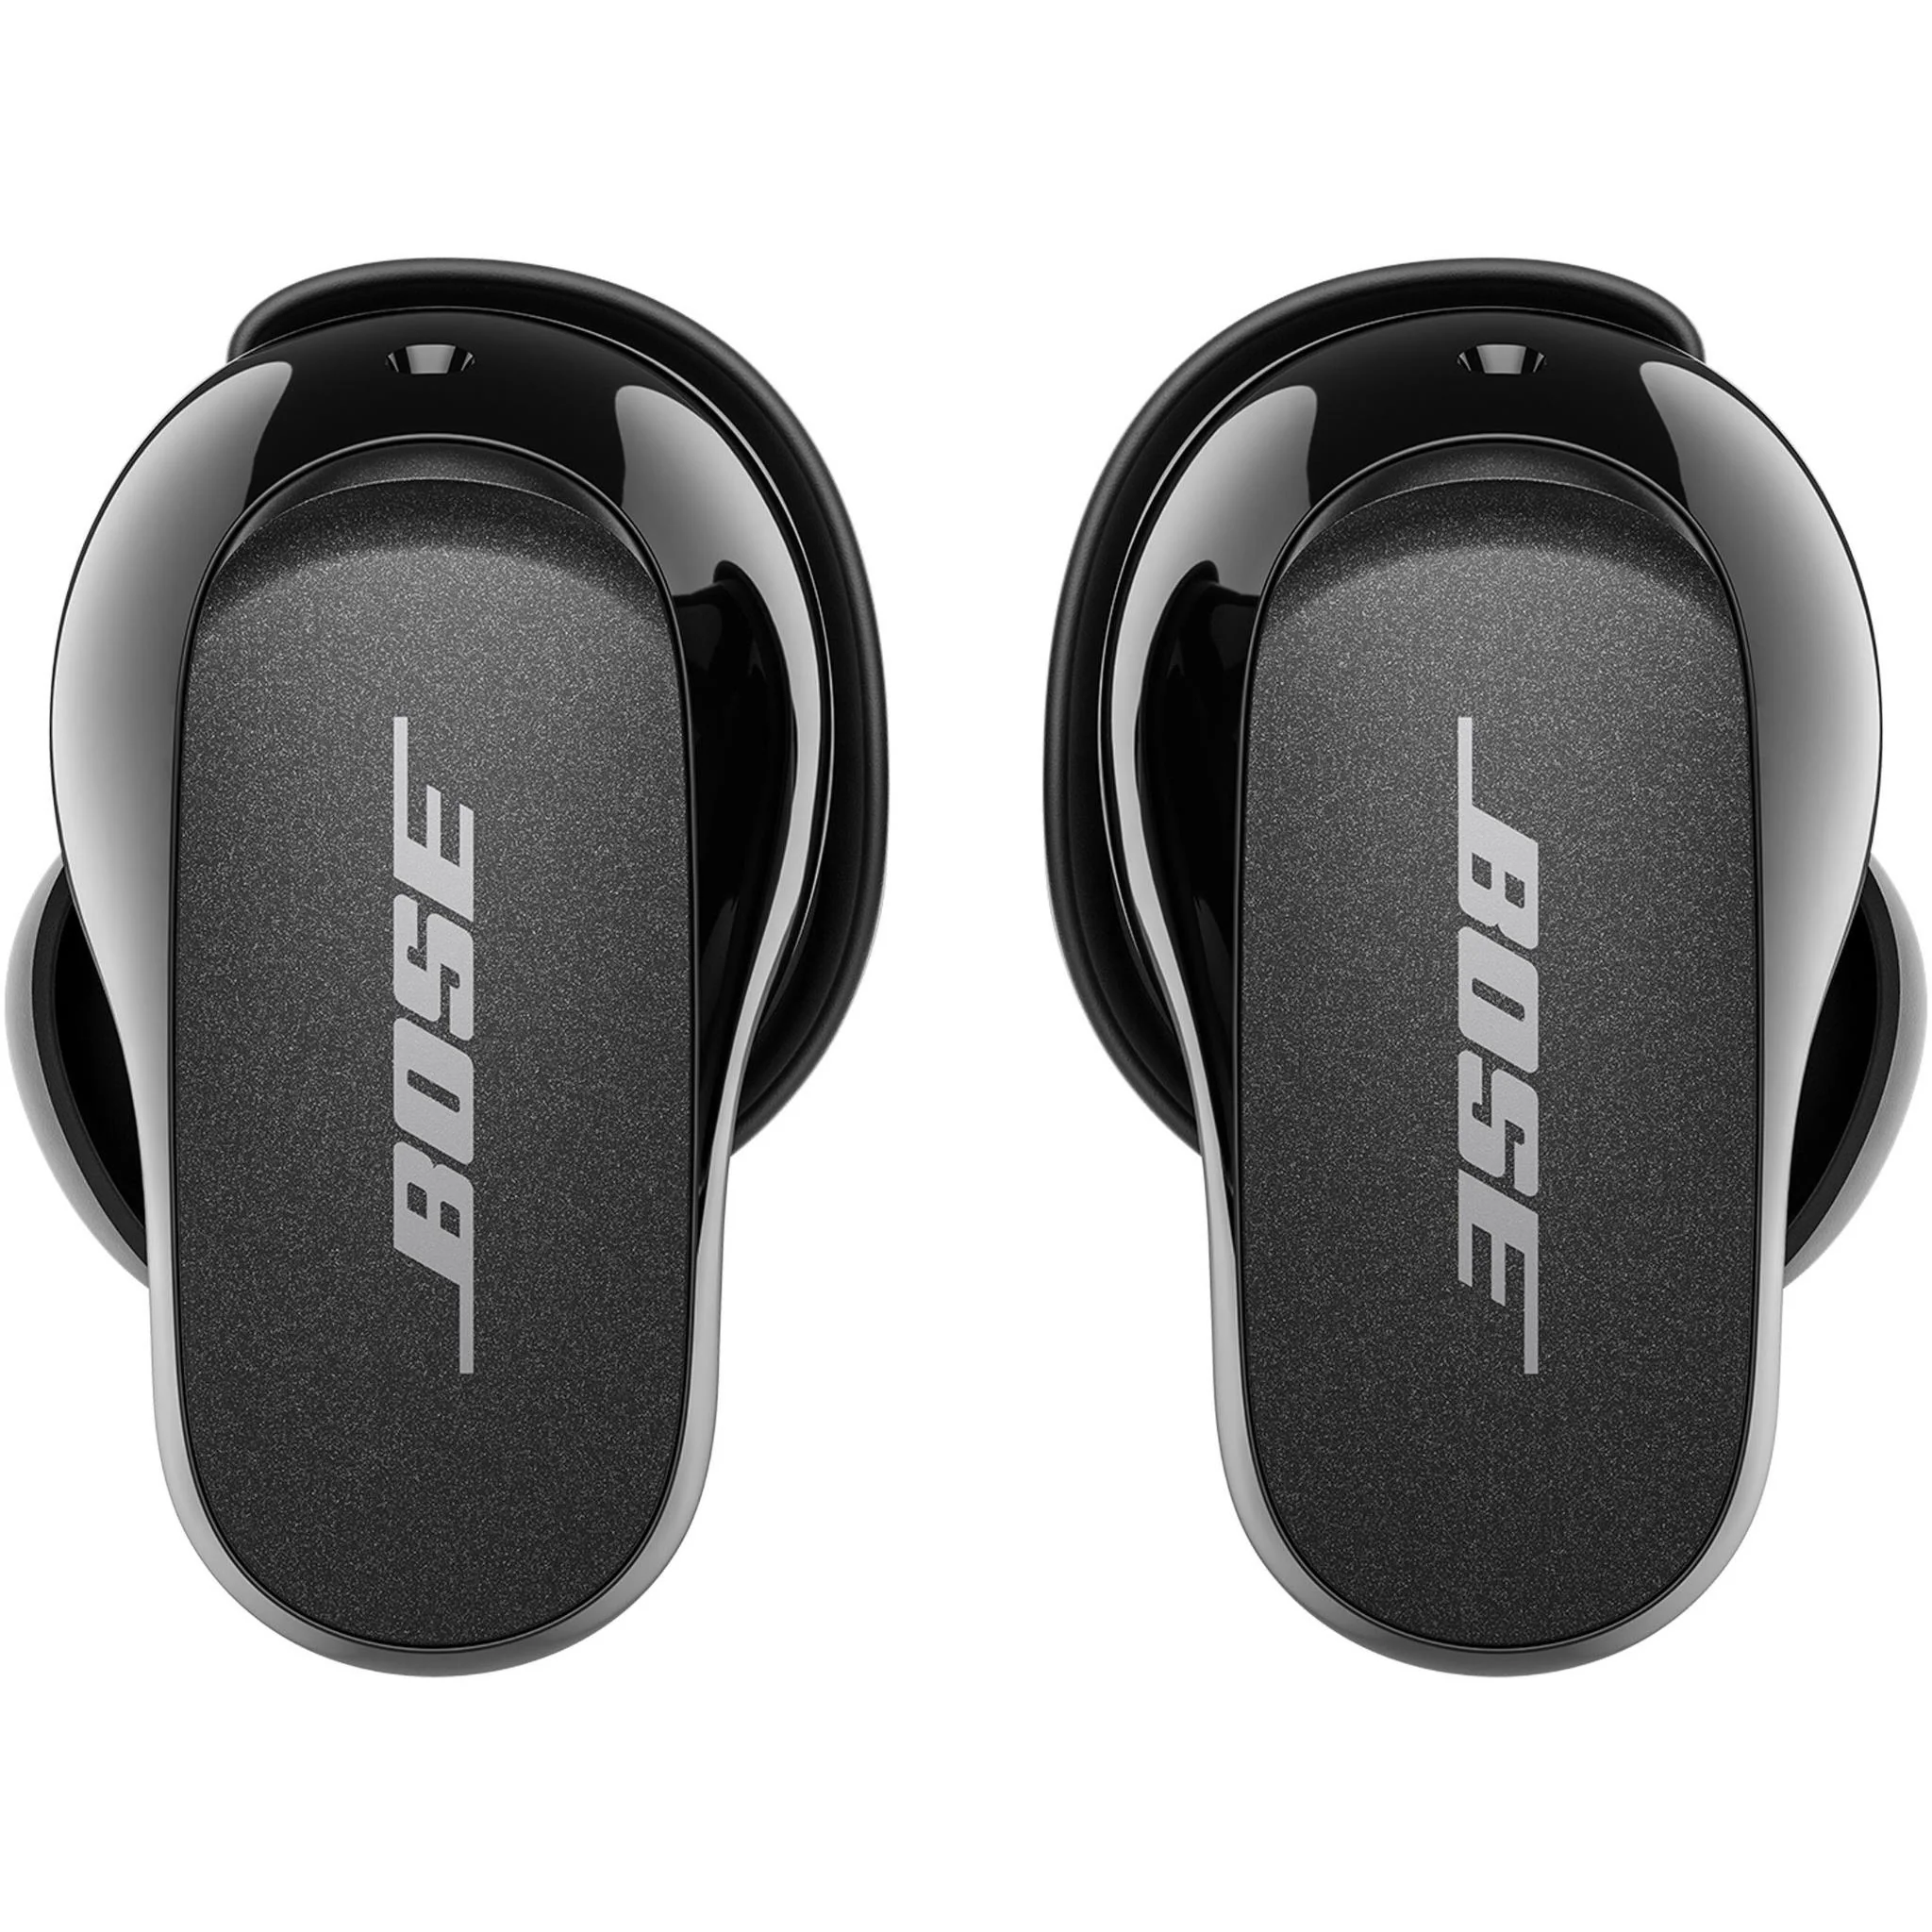 Bose QuietComfort Noise Cancelling Earbuds II (Black)